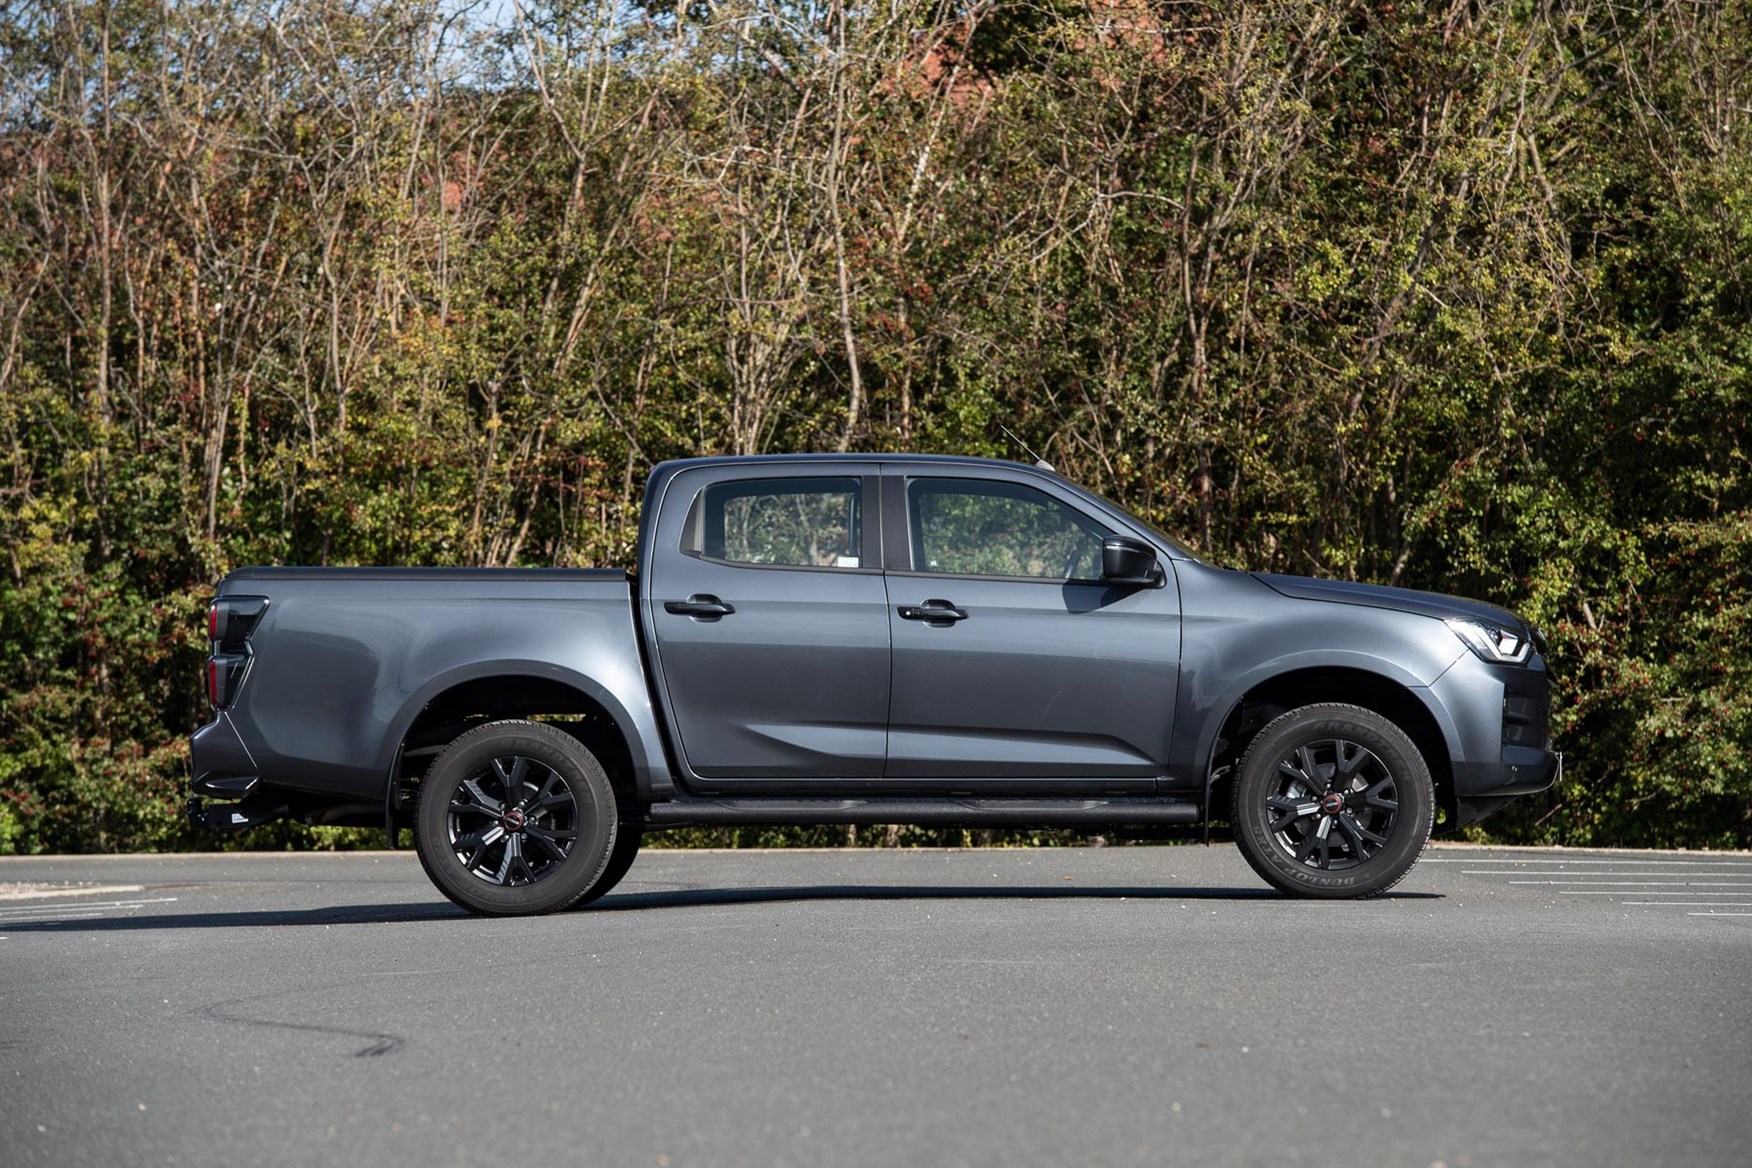 The double-cab versions have a good balance between passenger and practicality provision.